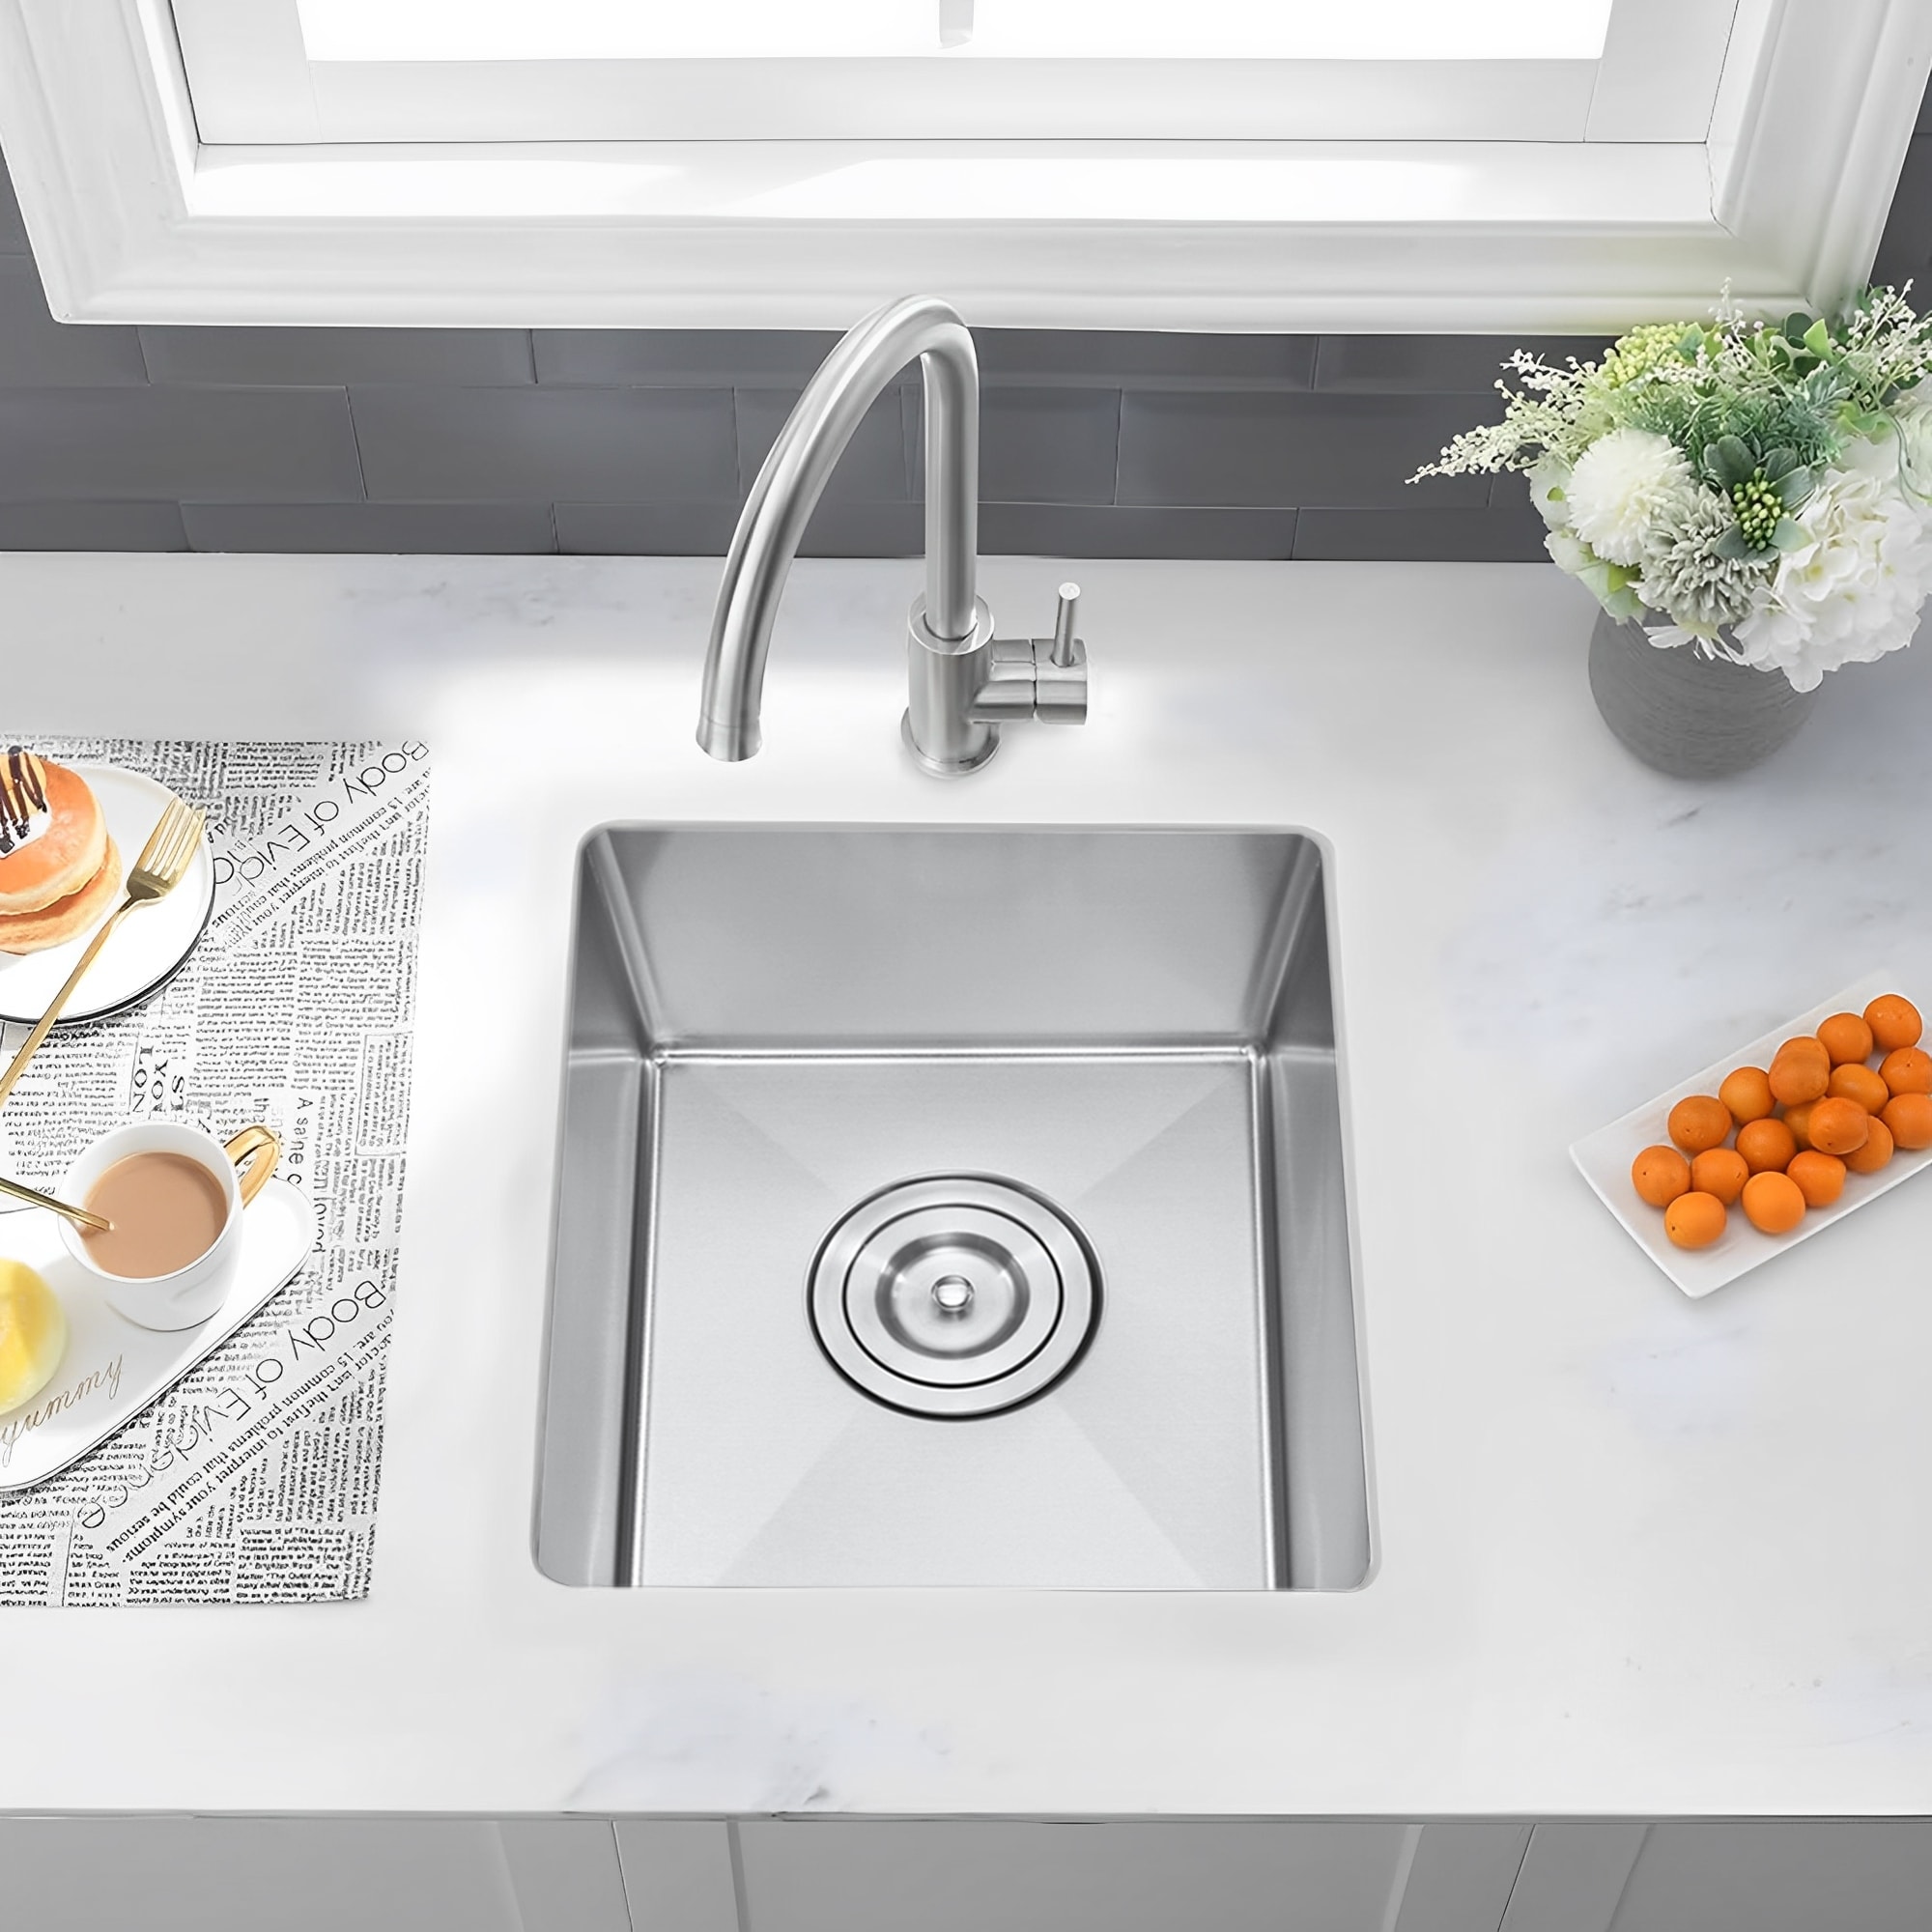 https://ak1.ostkcdn.com/images/products/is/images/direct/f9aa327aa71e905c7390a0a6ef14aecb567d4dfb/Stainless-Steel-Kitchen-Sink-Undermount-Single-Bowl-with-Strainer.jpg